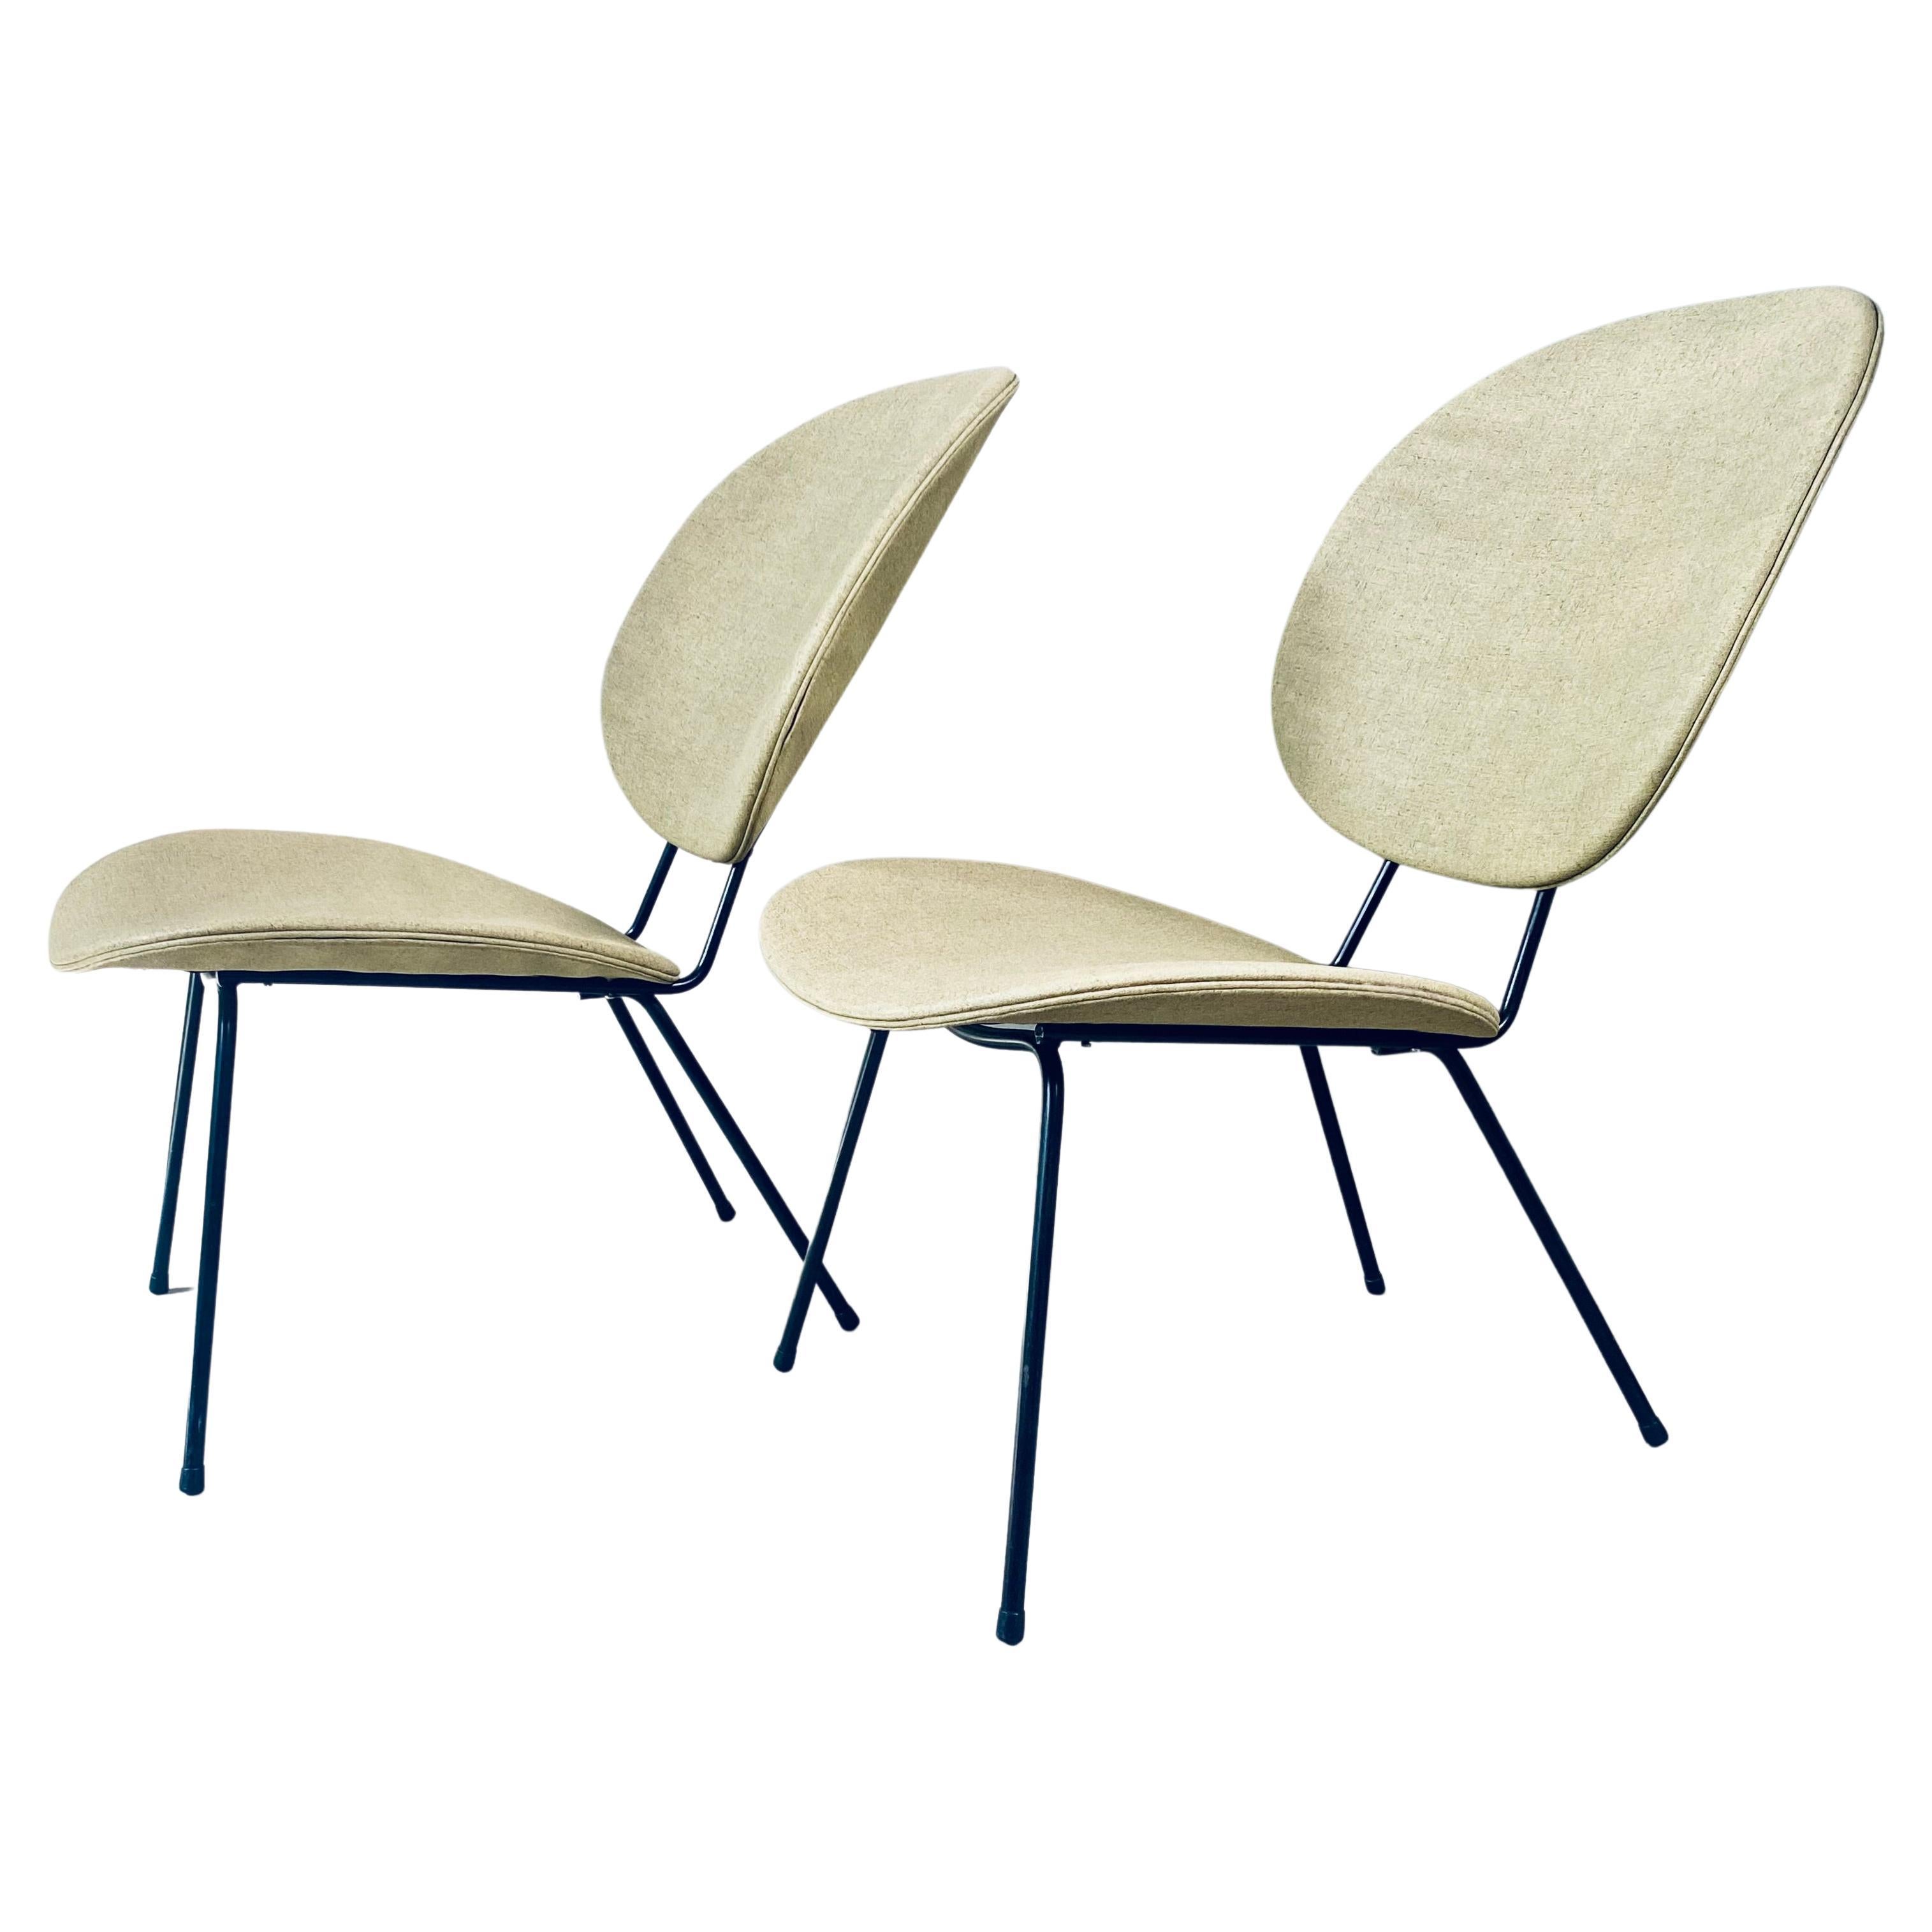 Set of 2 Lounge Chairs by W.H. Gispen for Kembo, Netherlands 1950